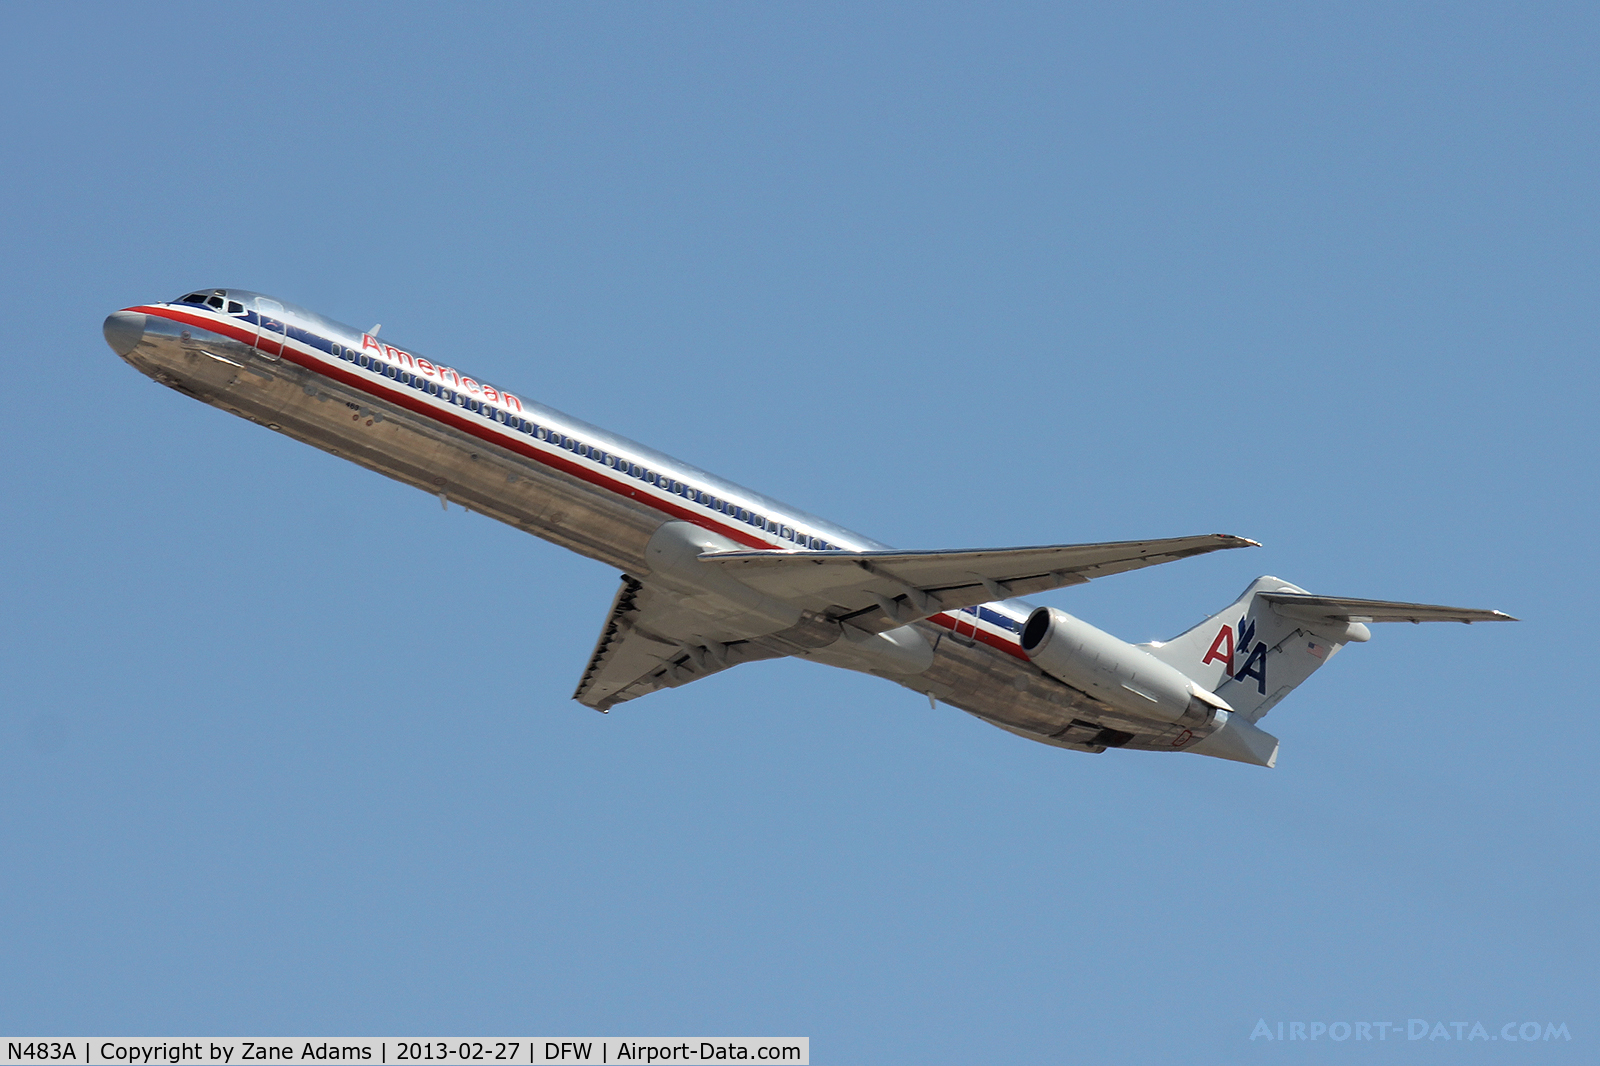 N483A, 1988 McDonnell Douglas MD-82 (DC-9-82) C/N 49676, American Airlines at DFW Airport